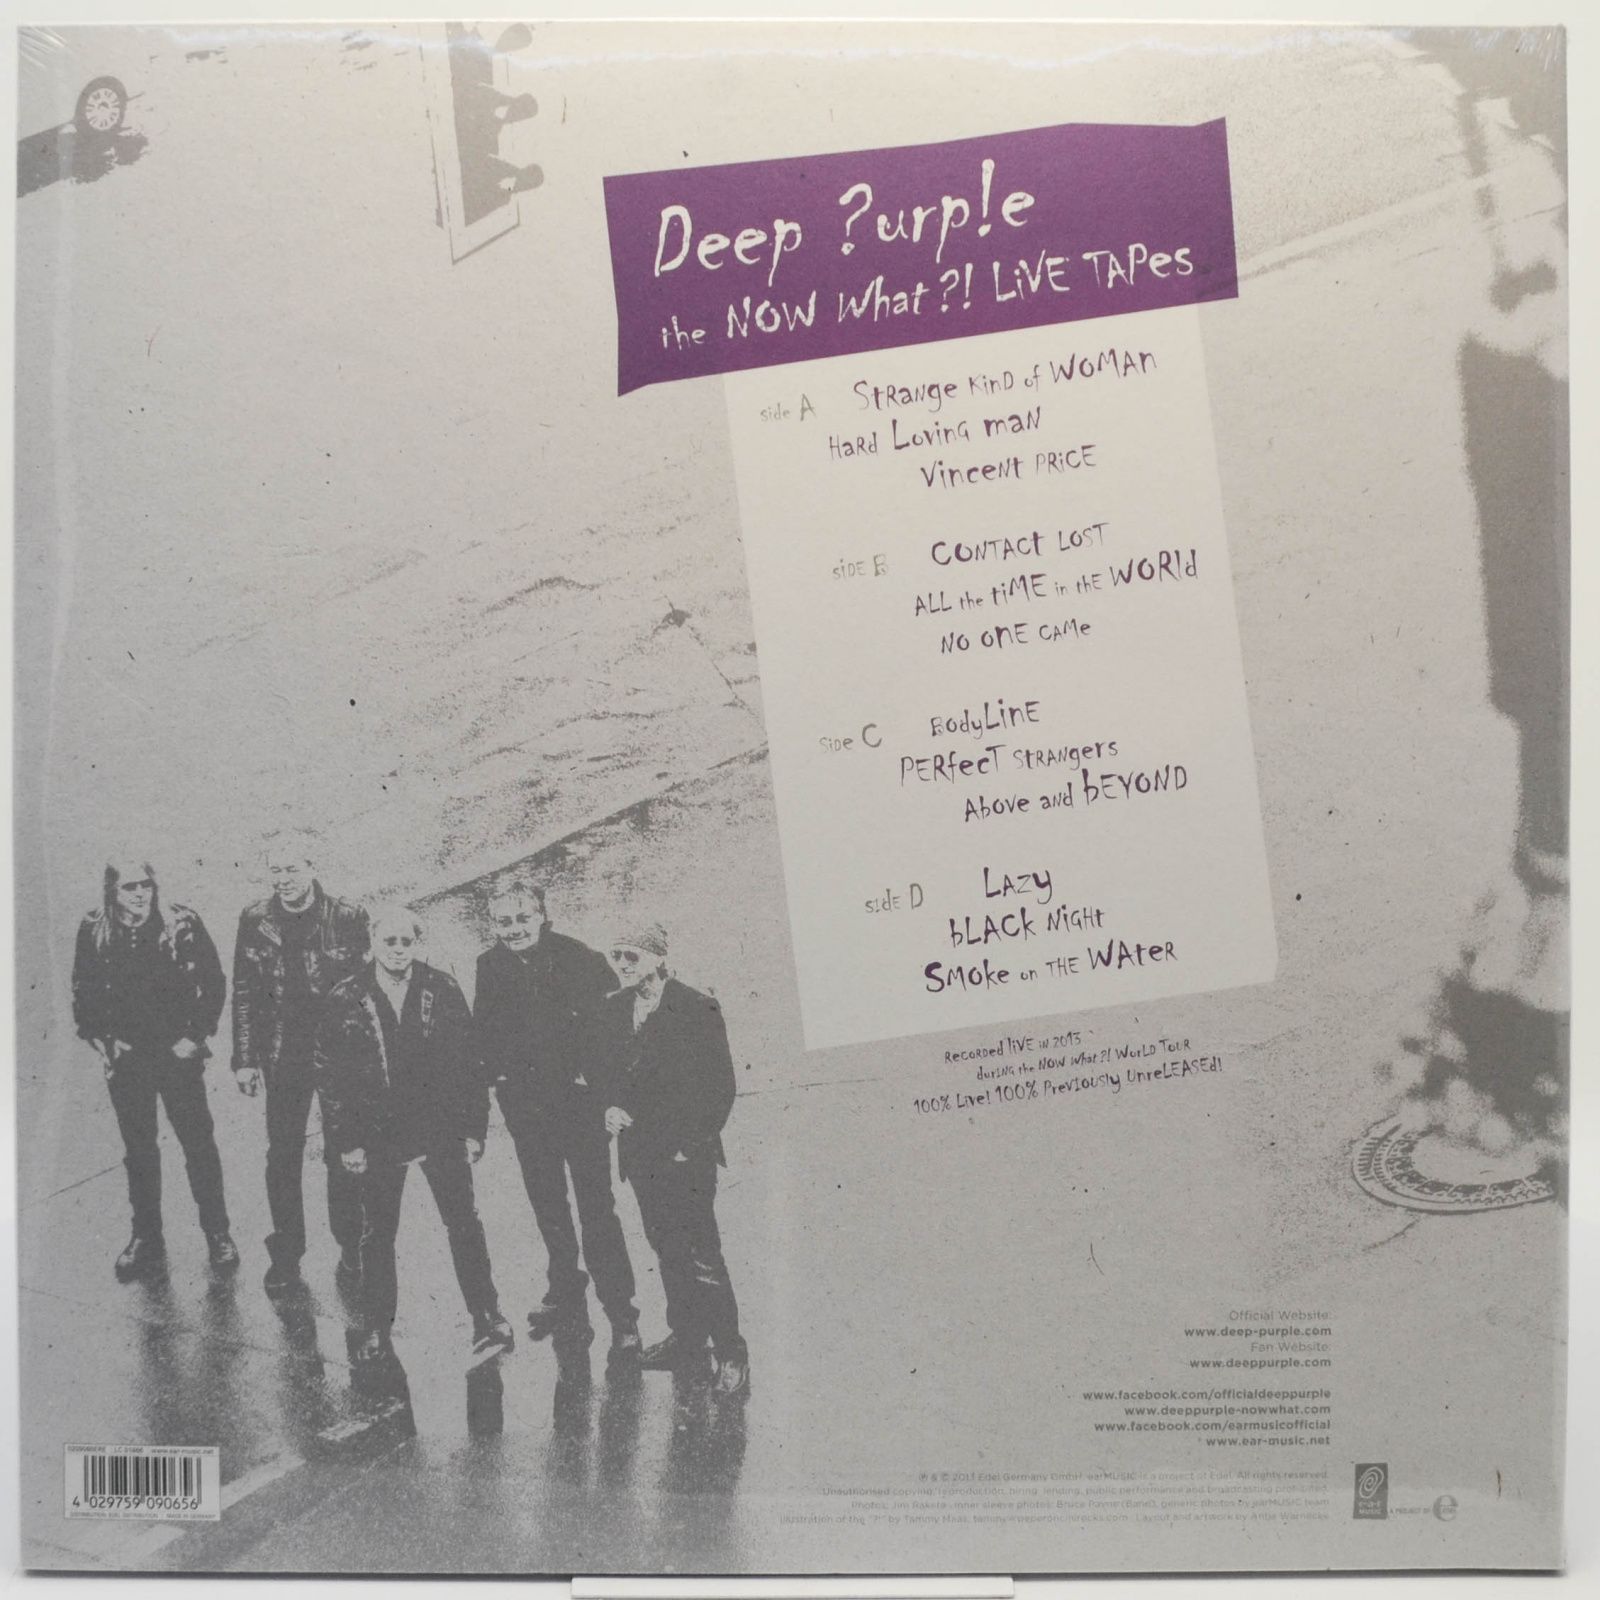 Deep Purple — The Now What?! Live Tapes (2LP), 2013